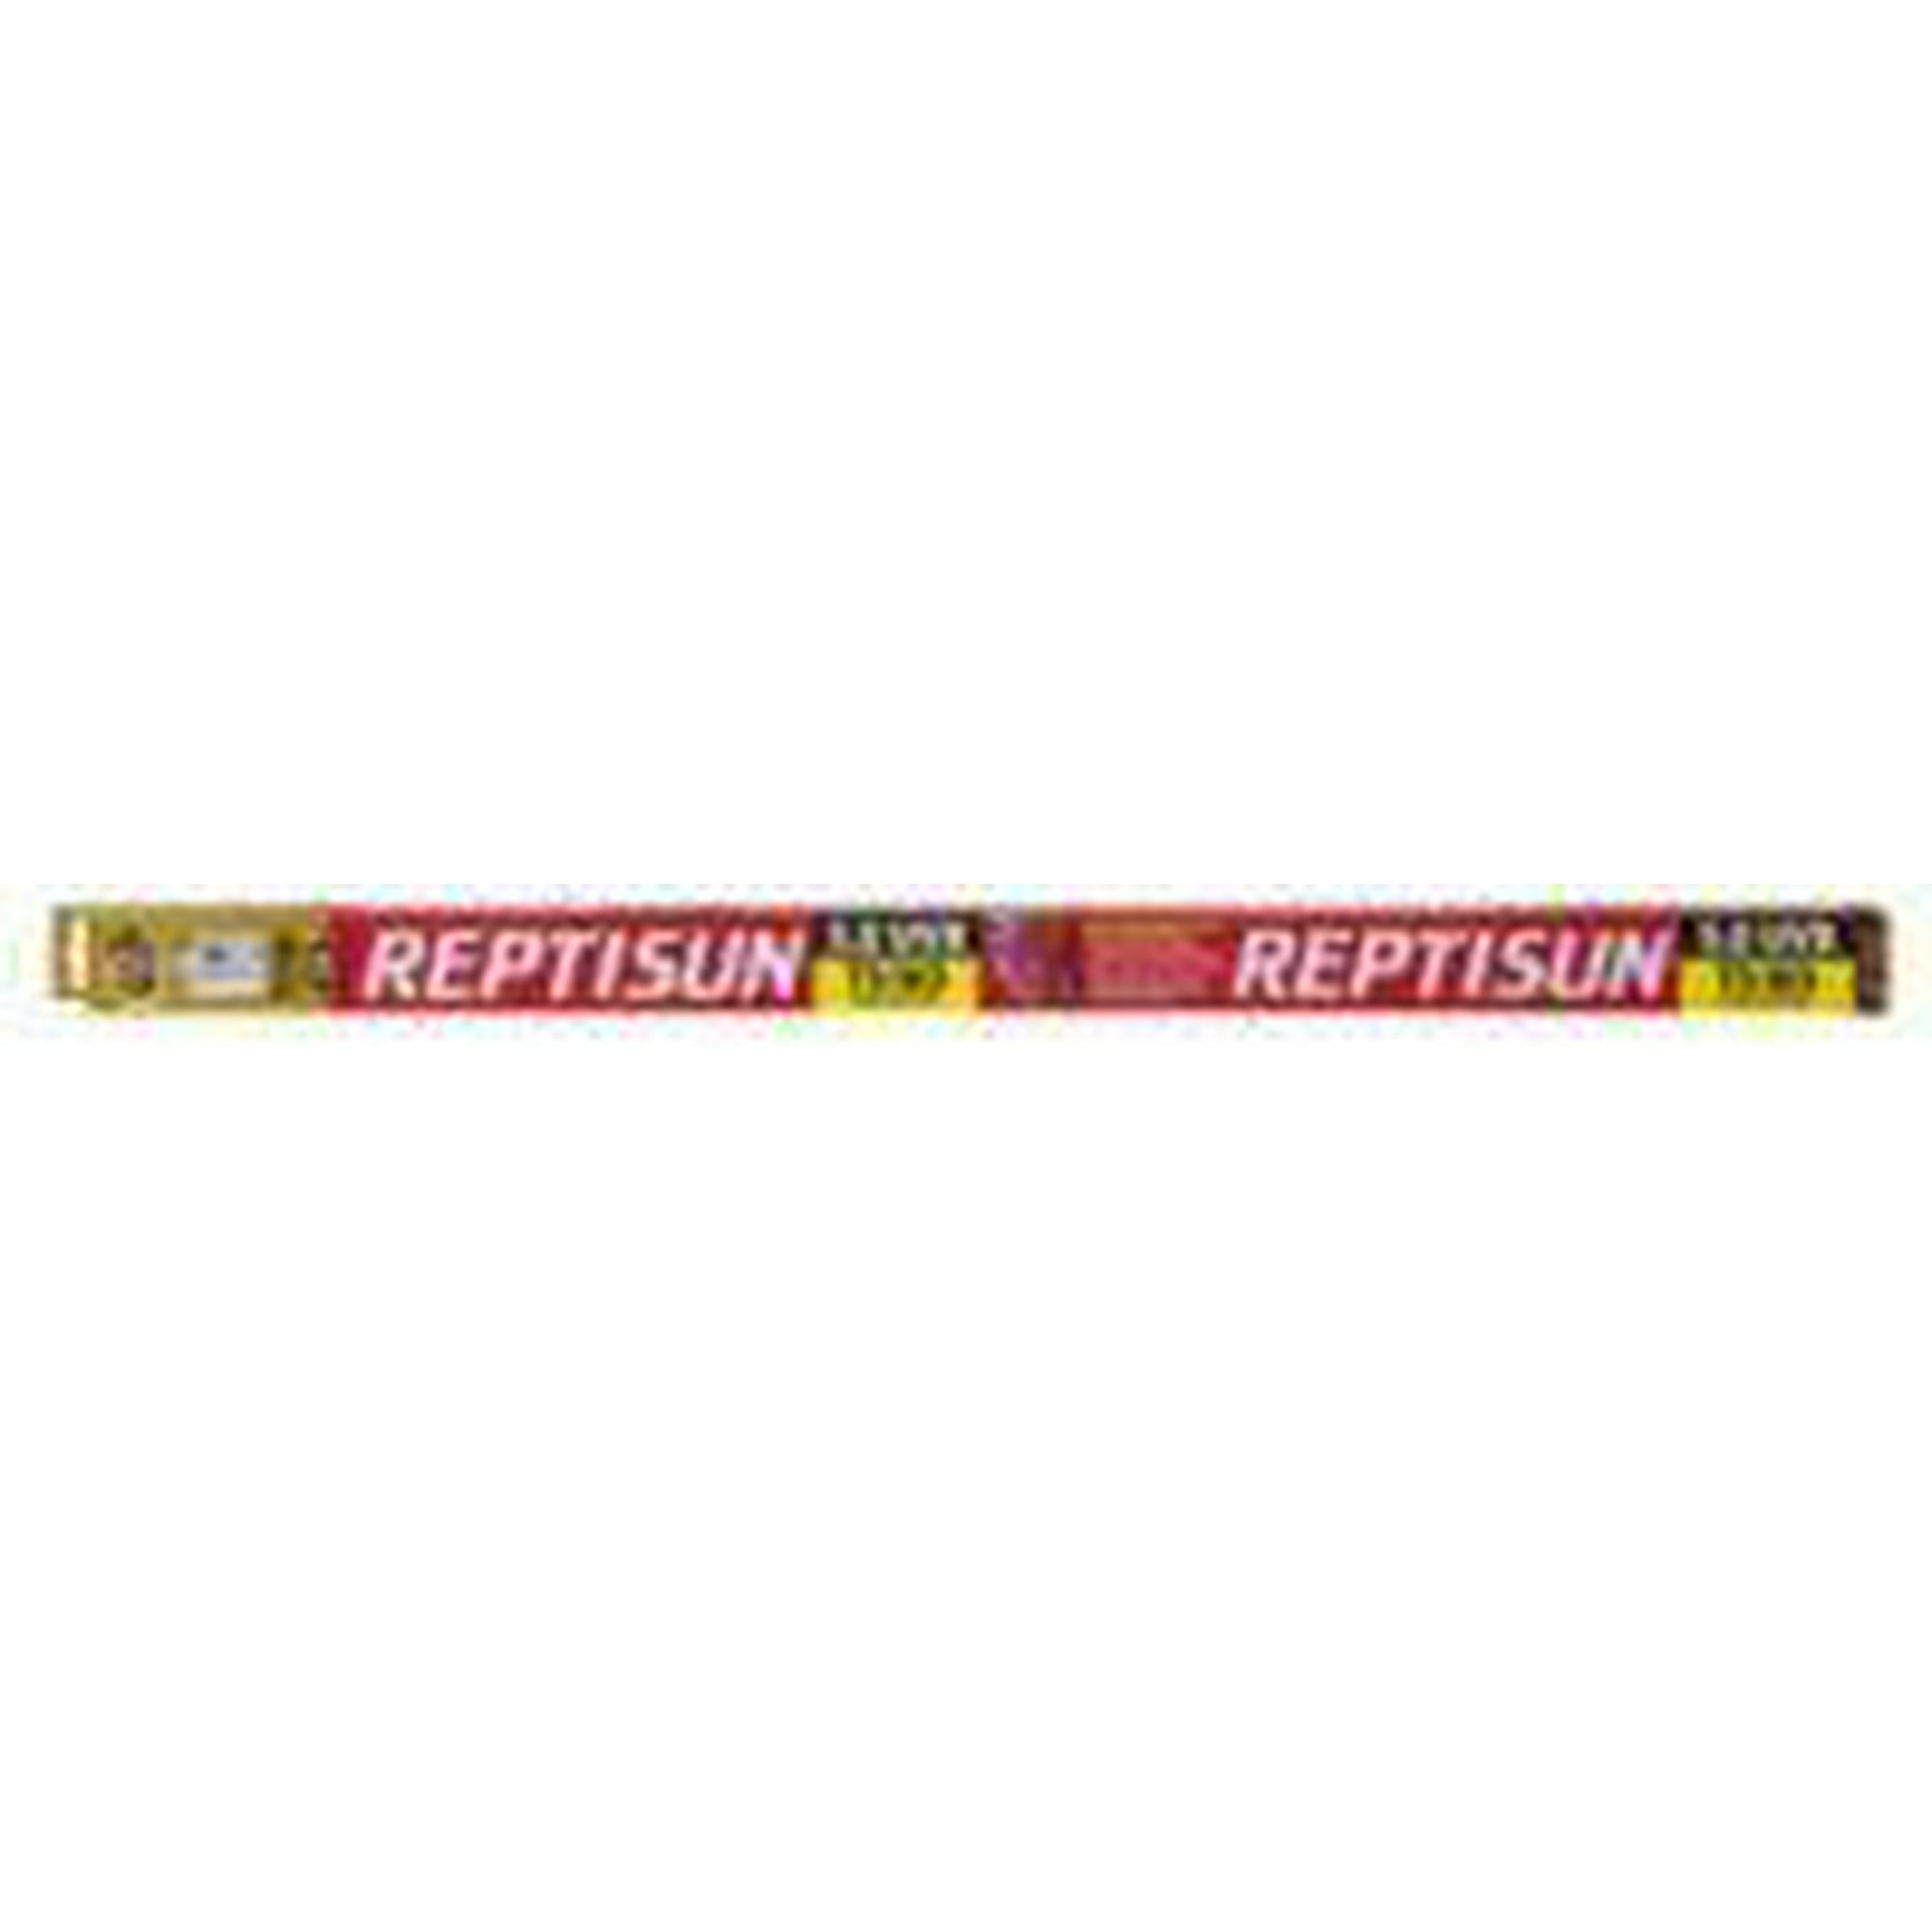 Zoo Med ReptiSun T5 HO 5.0 UVB Replacement Bulb 24 Watts 22 Bulb Pack of 2